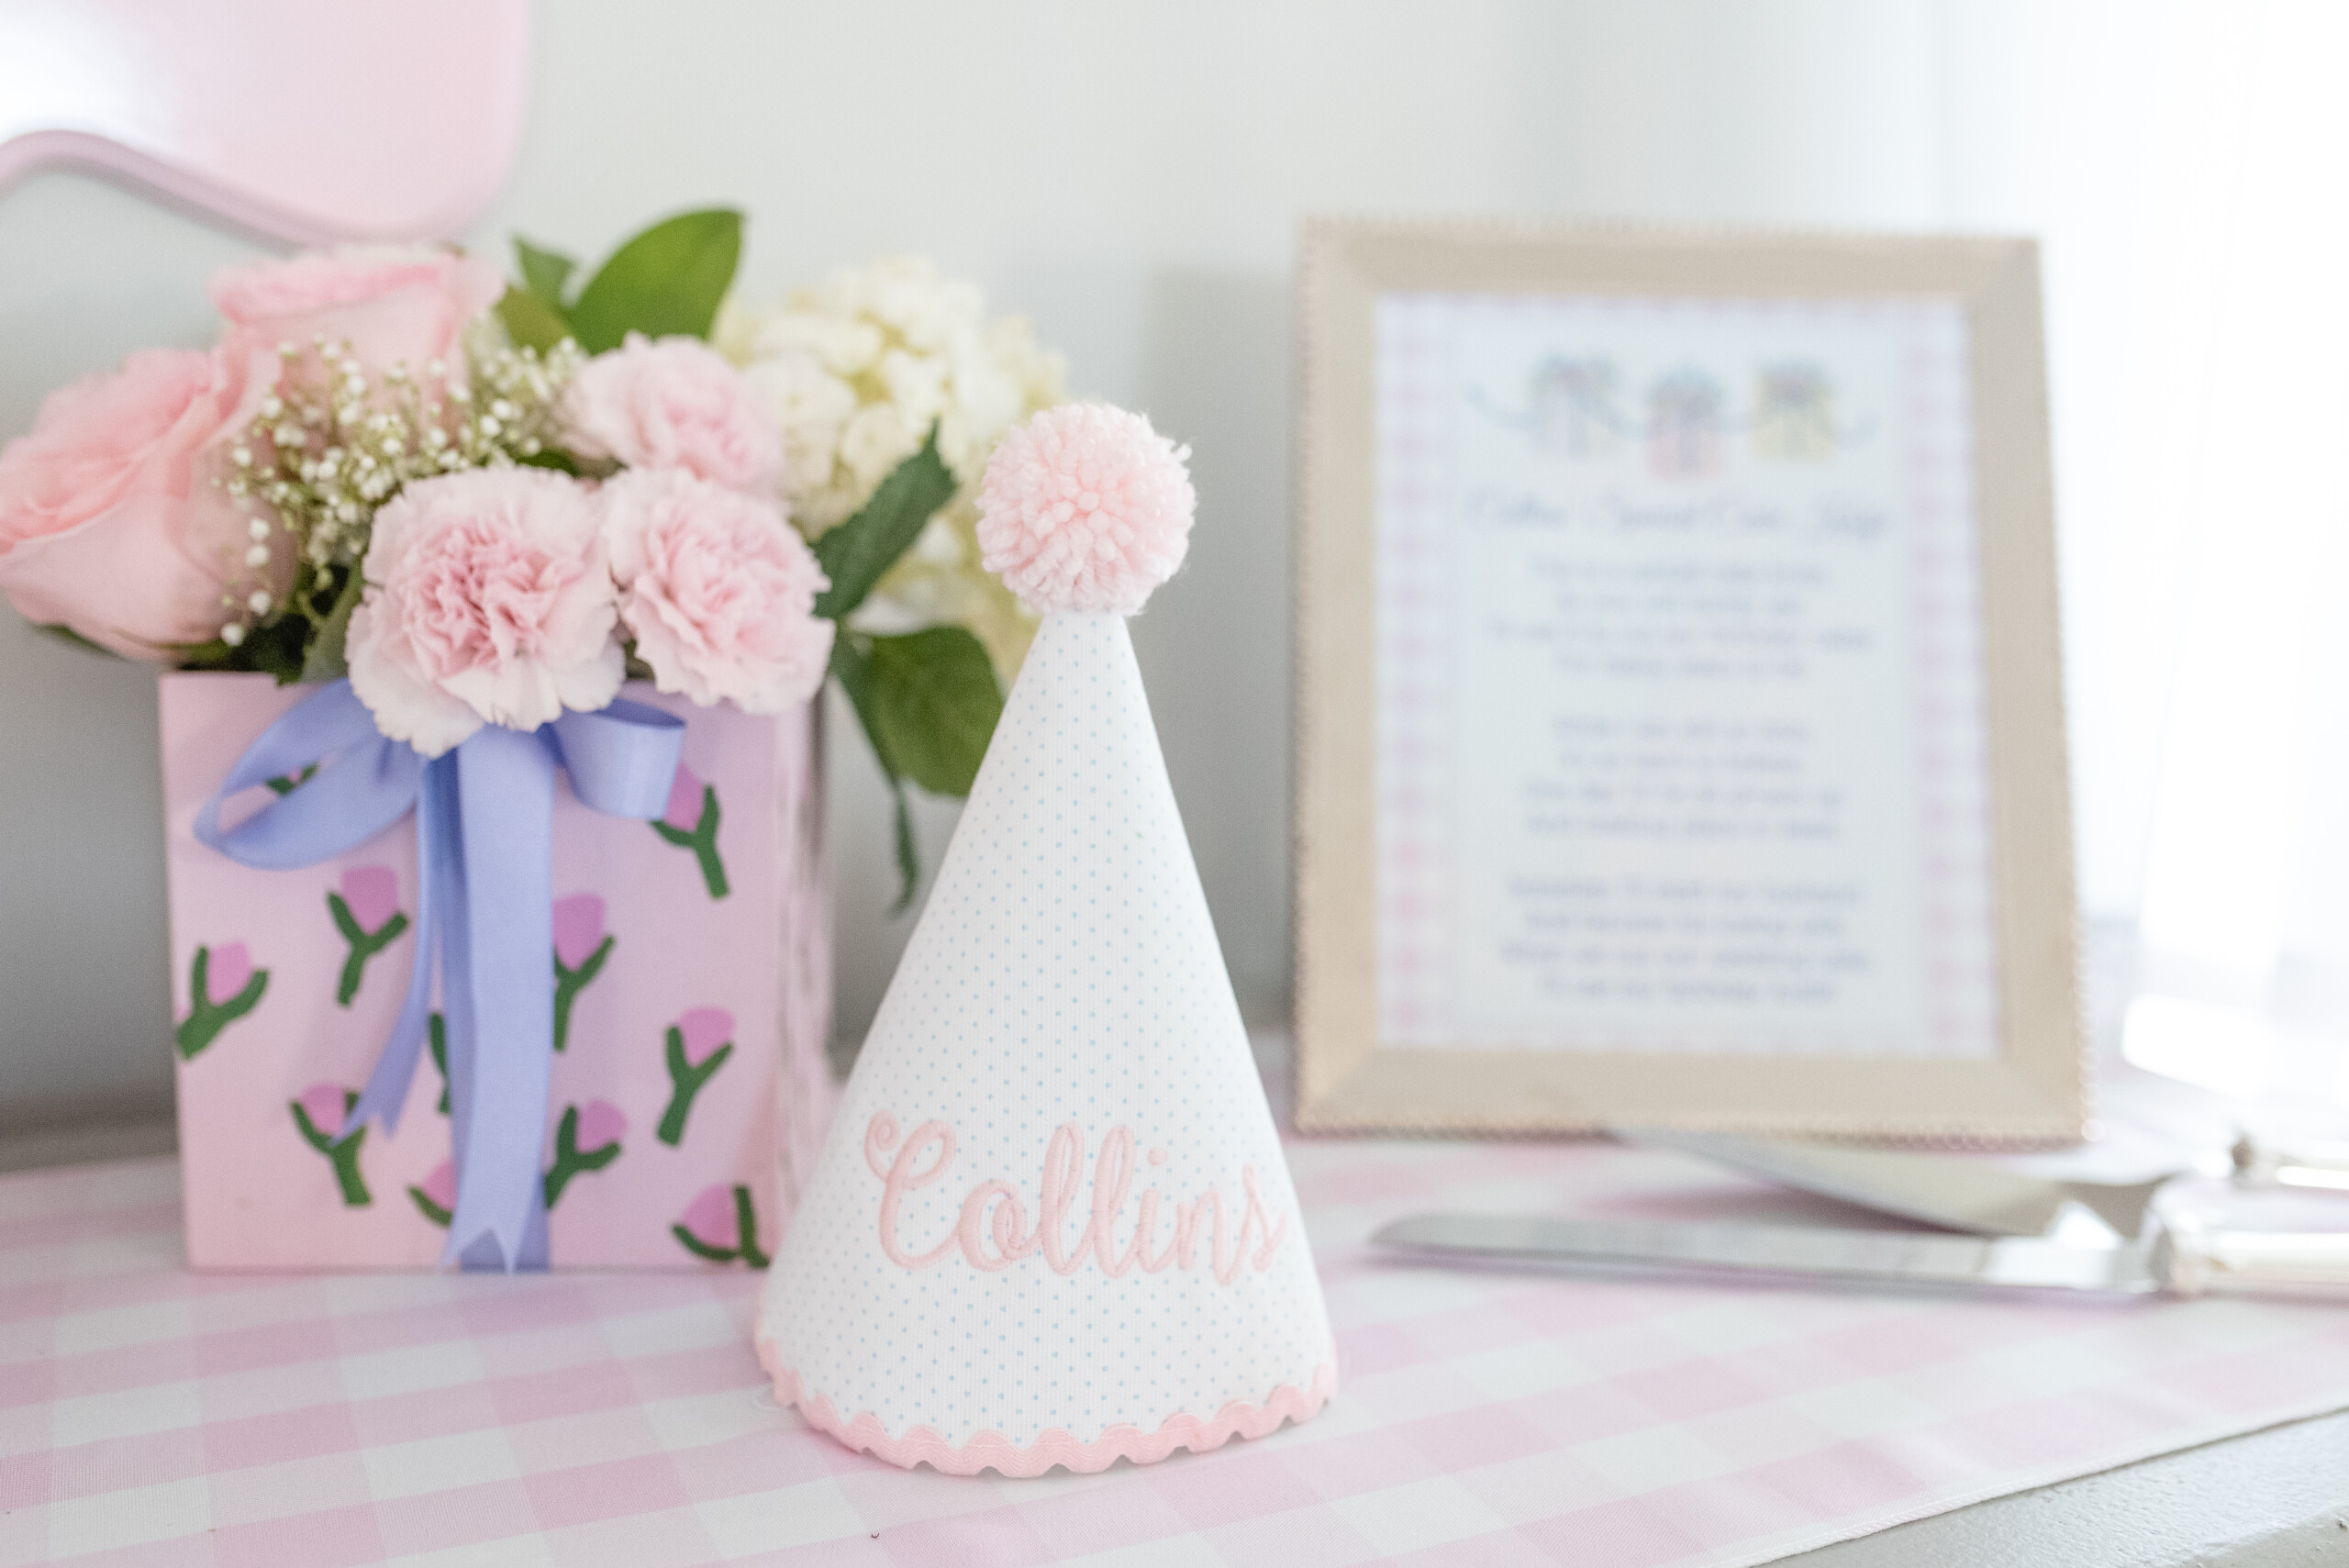 Gorgeous Pastel 1st Birthday by Dolly Delong